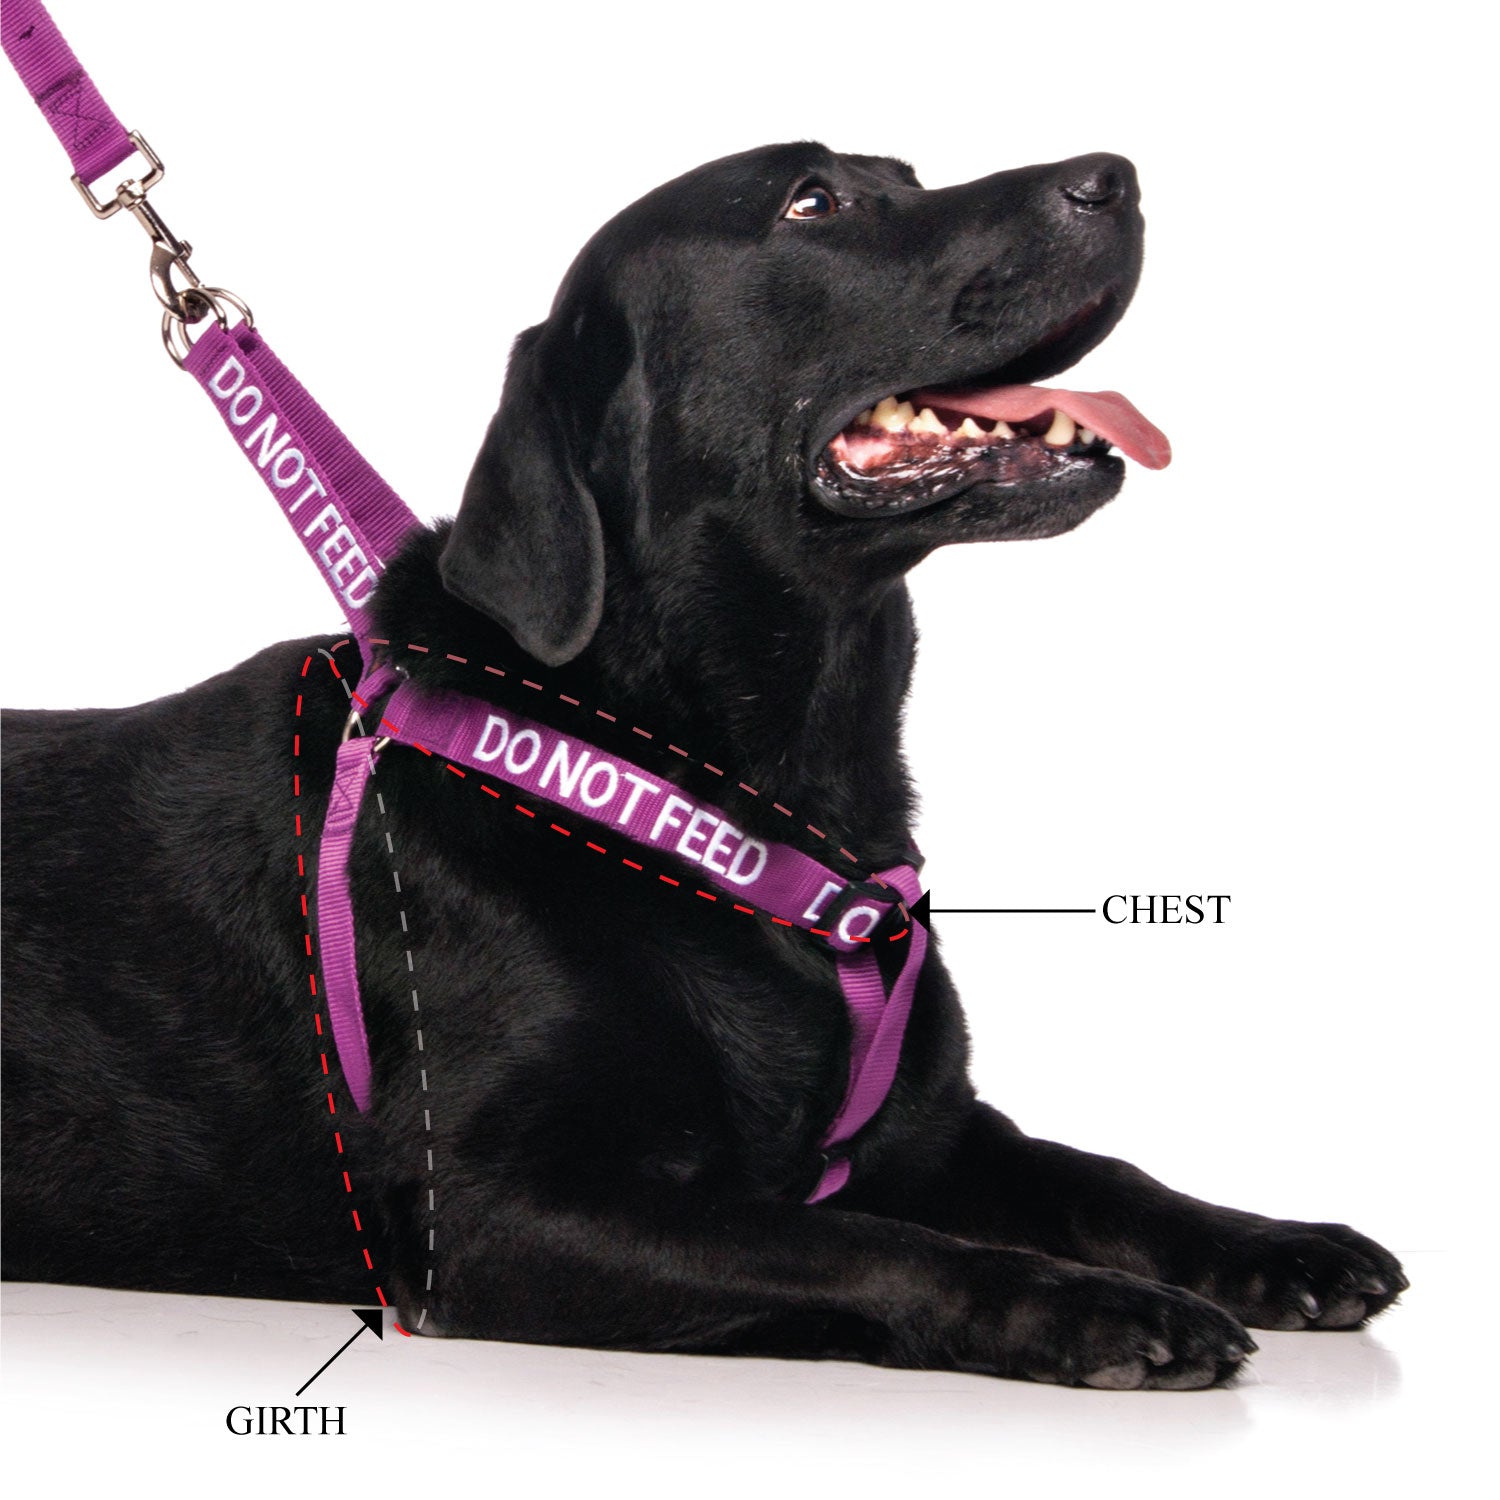 DO NOT FEED - L/XL adjustable Strap Harness